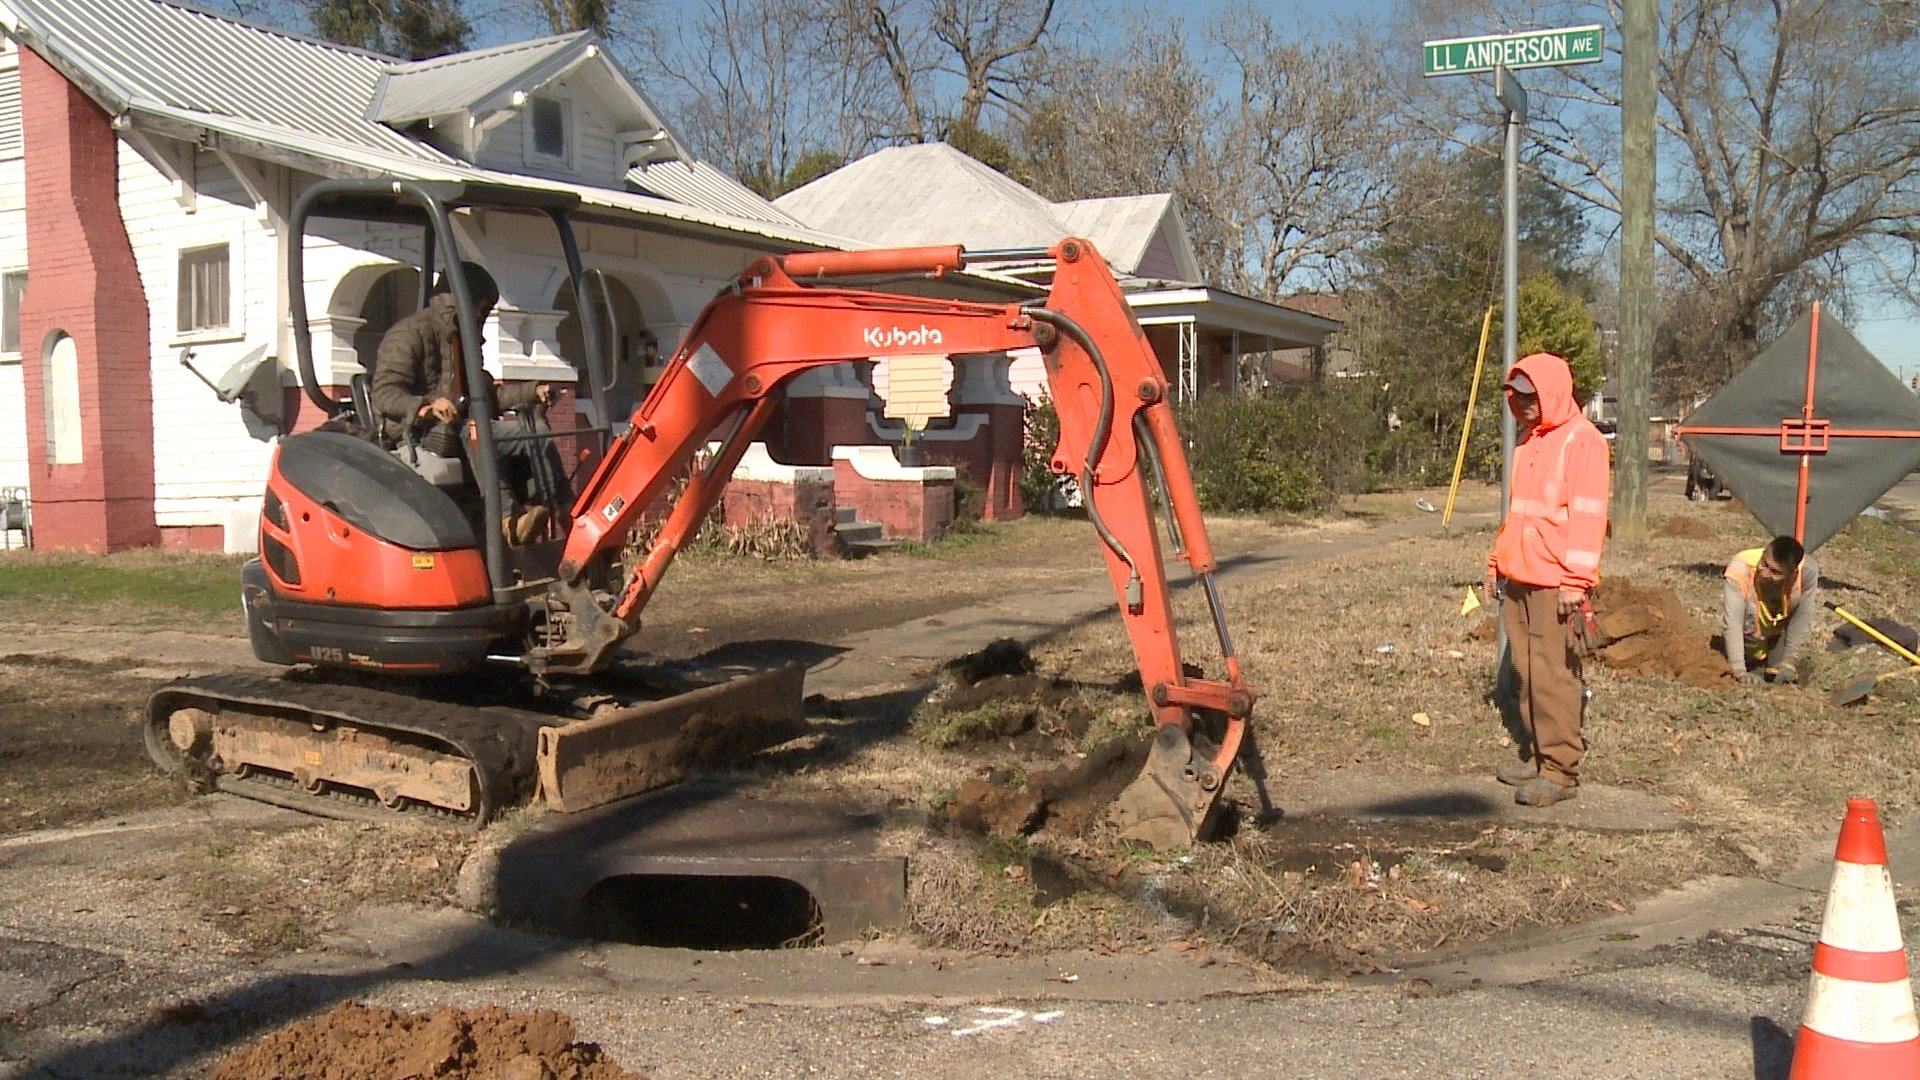 Fiber optics project aims to expand internet service in Selma